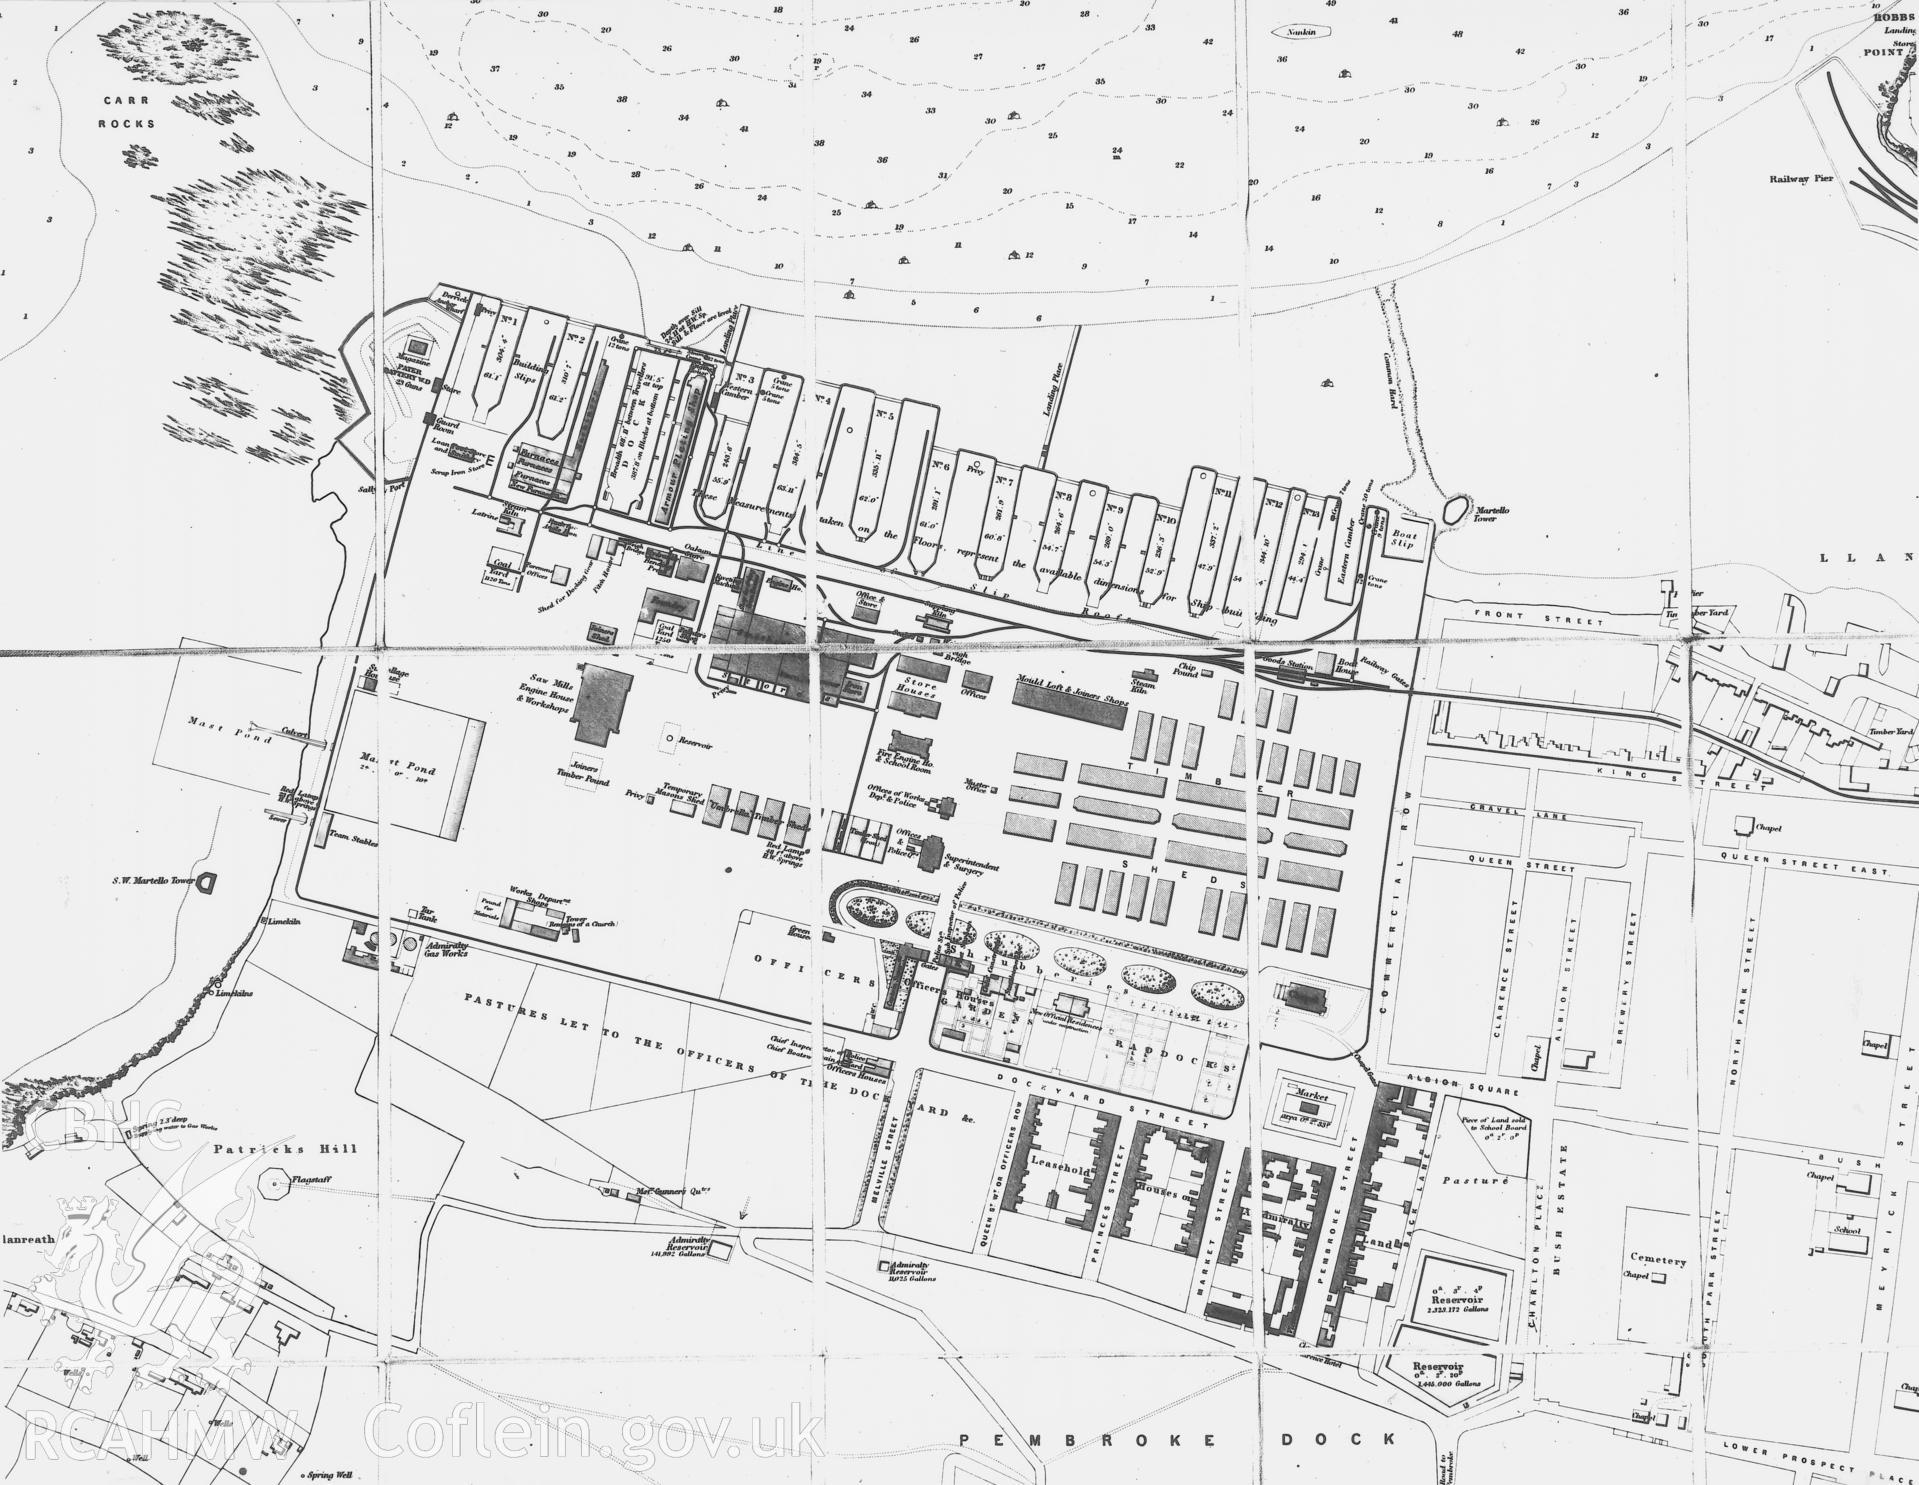 Pembroke Dockyard; photographic copies of three large scale plans showing the layout of the dockyard, origin uncertain.